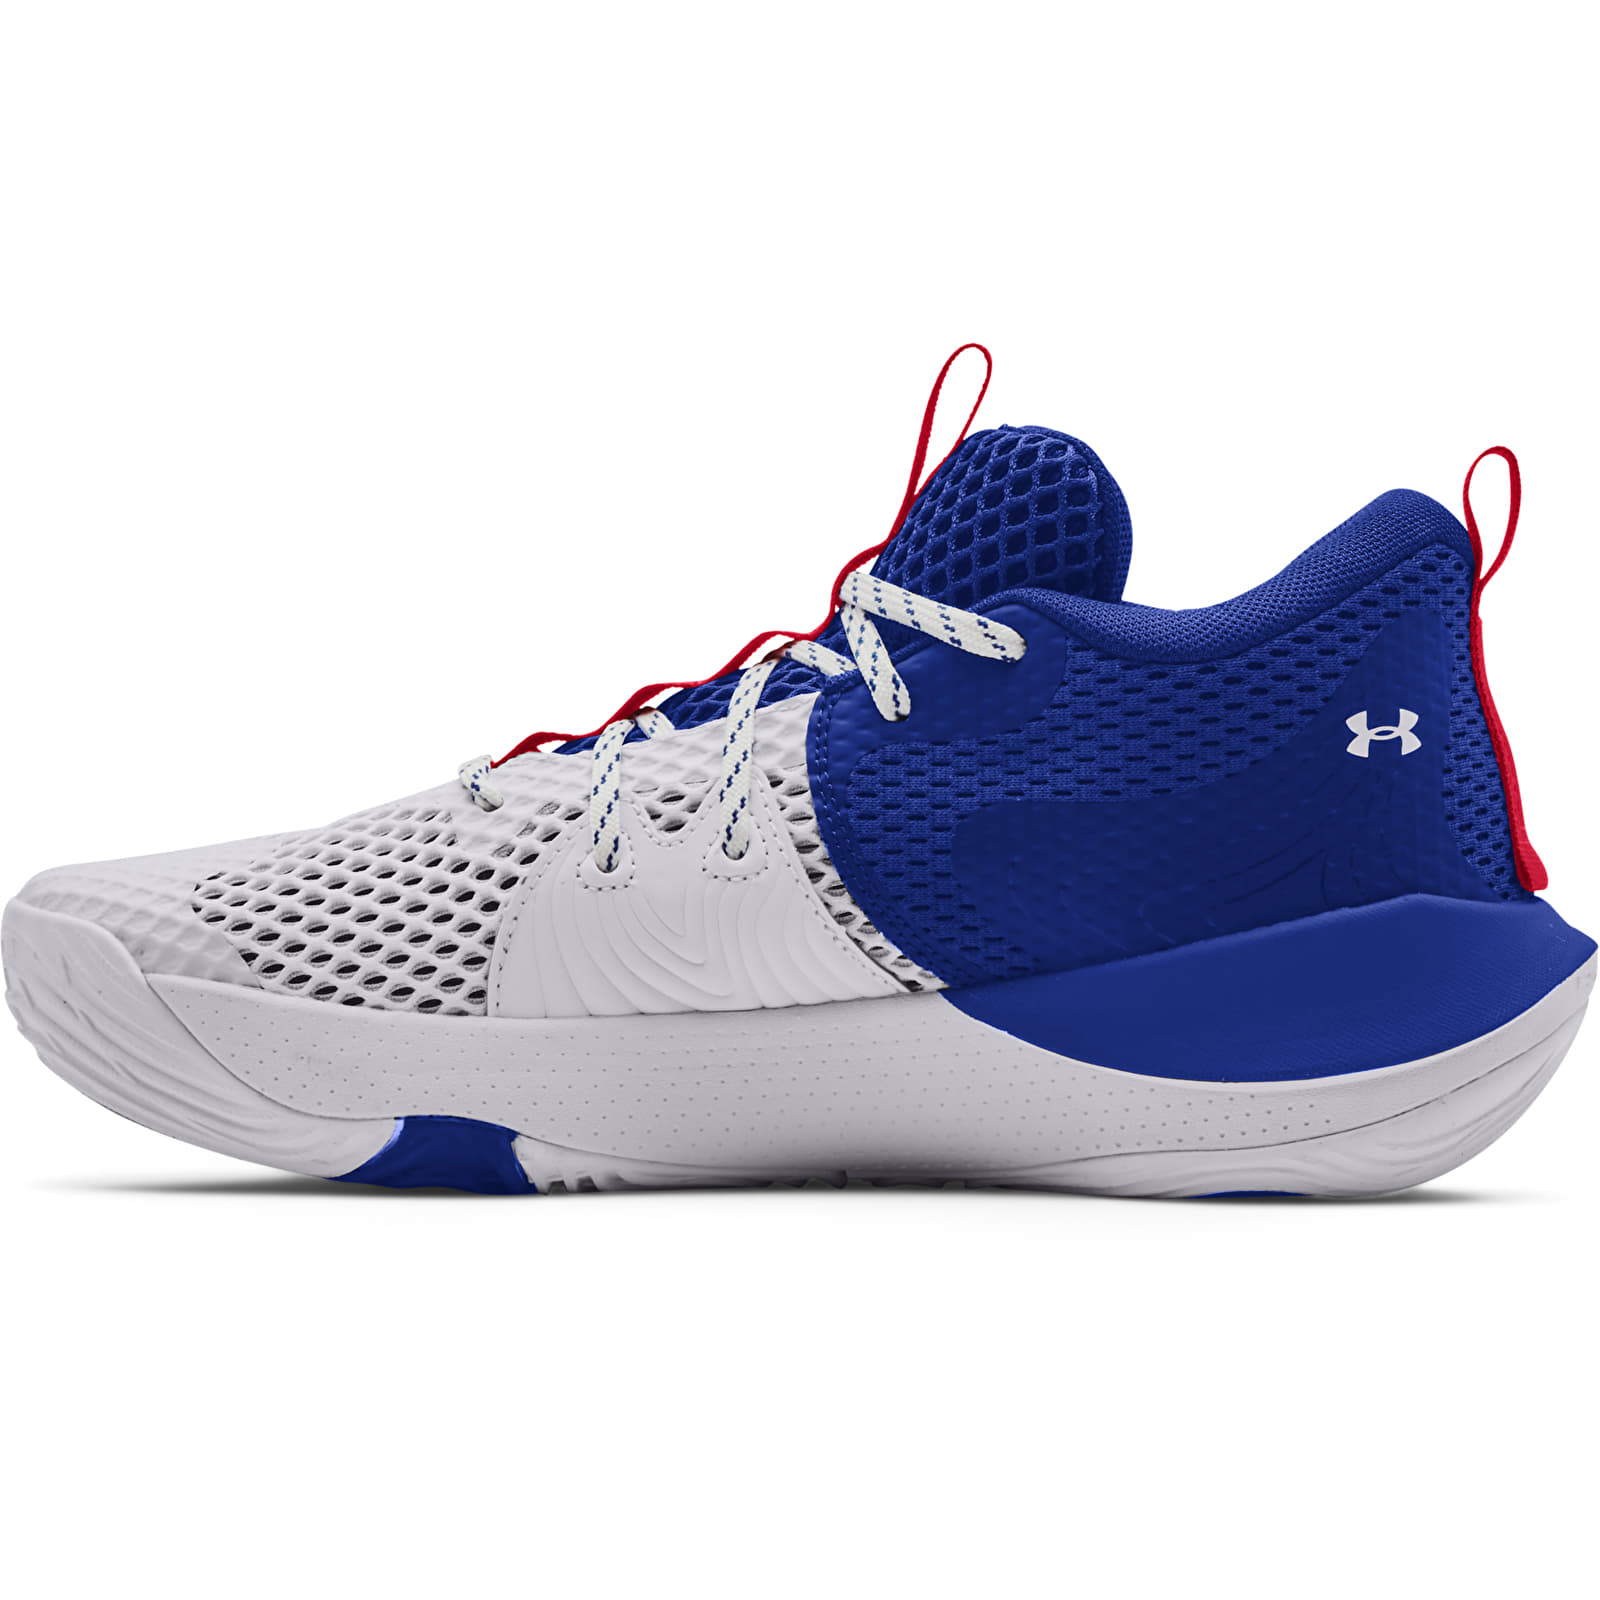 Men's shoes Under Armour Embiid 1 White